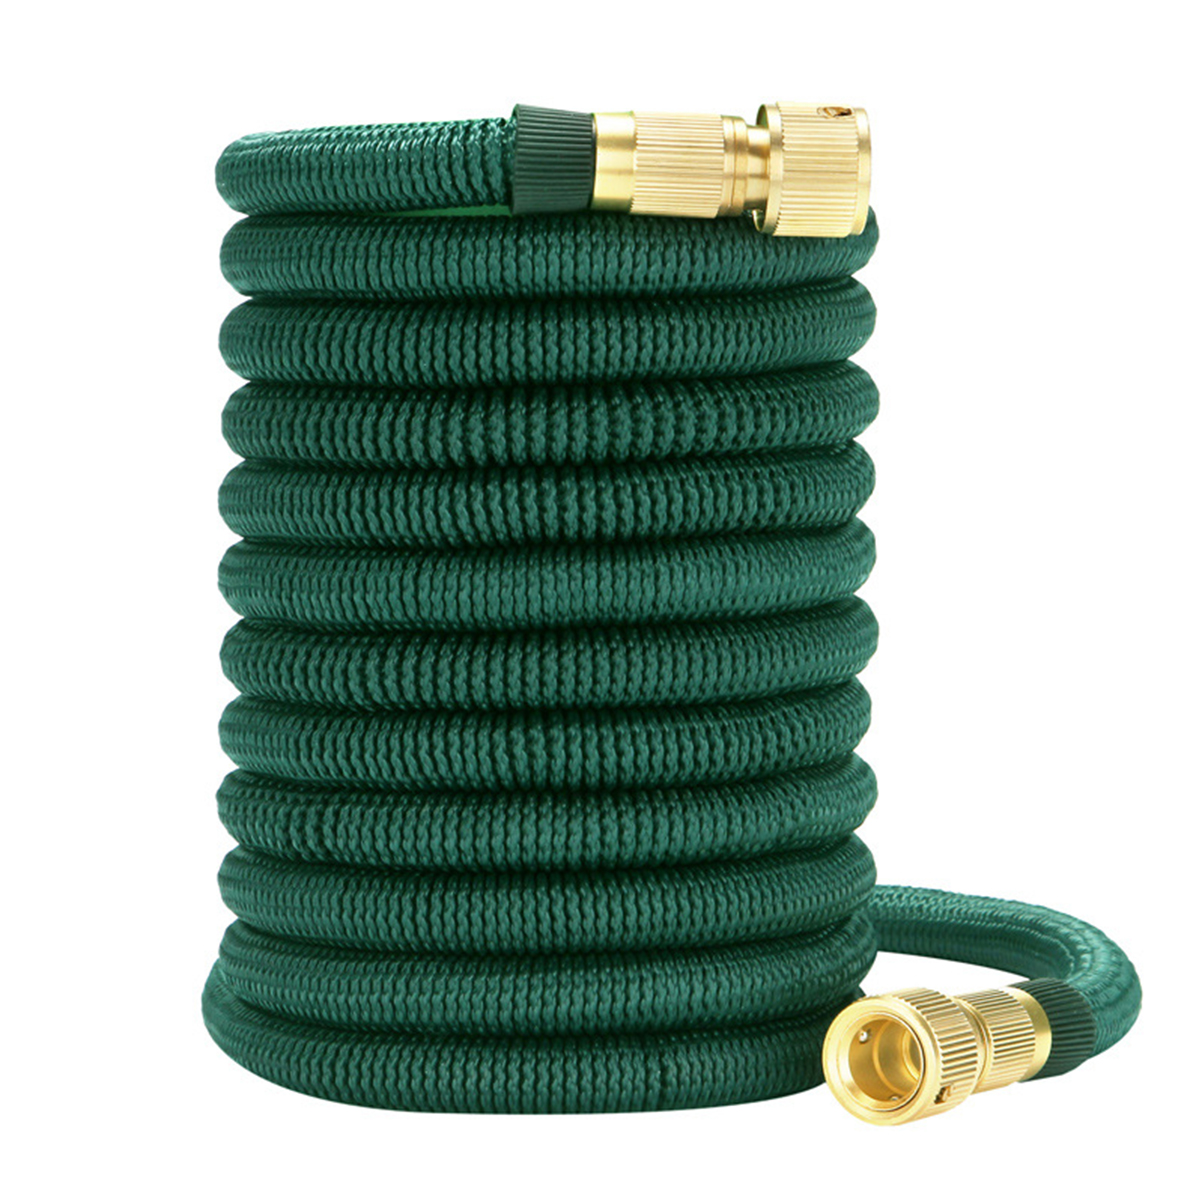 Dark-Green-Expandable-Flexible-Water-Hoses-Telescopic-Pipe-Full-Copper-Connector-for-Car-Wash-Tool-1808817-2